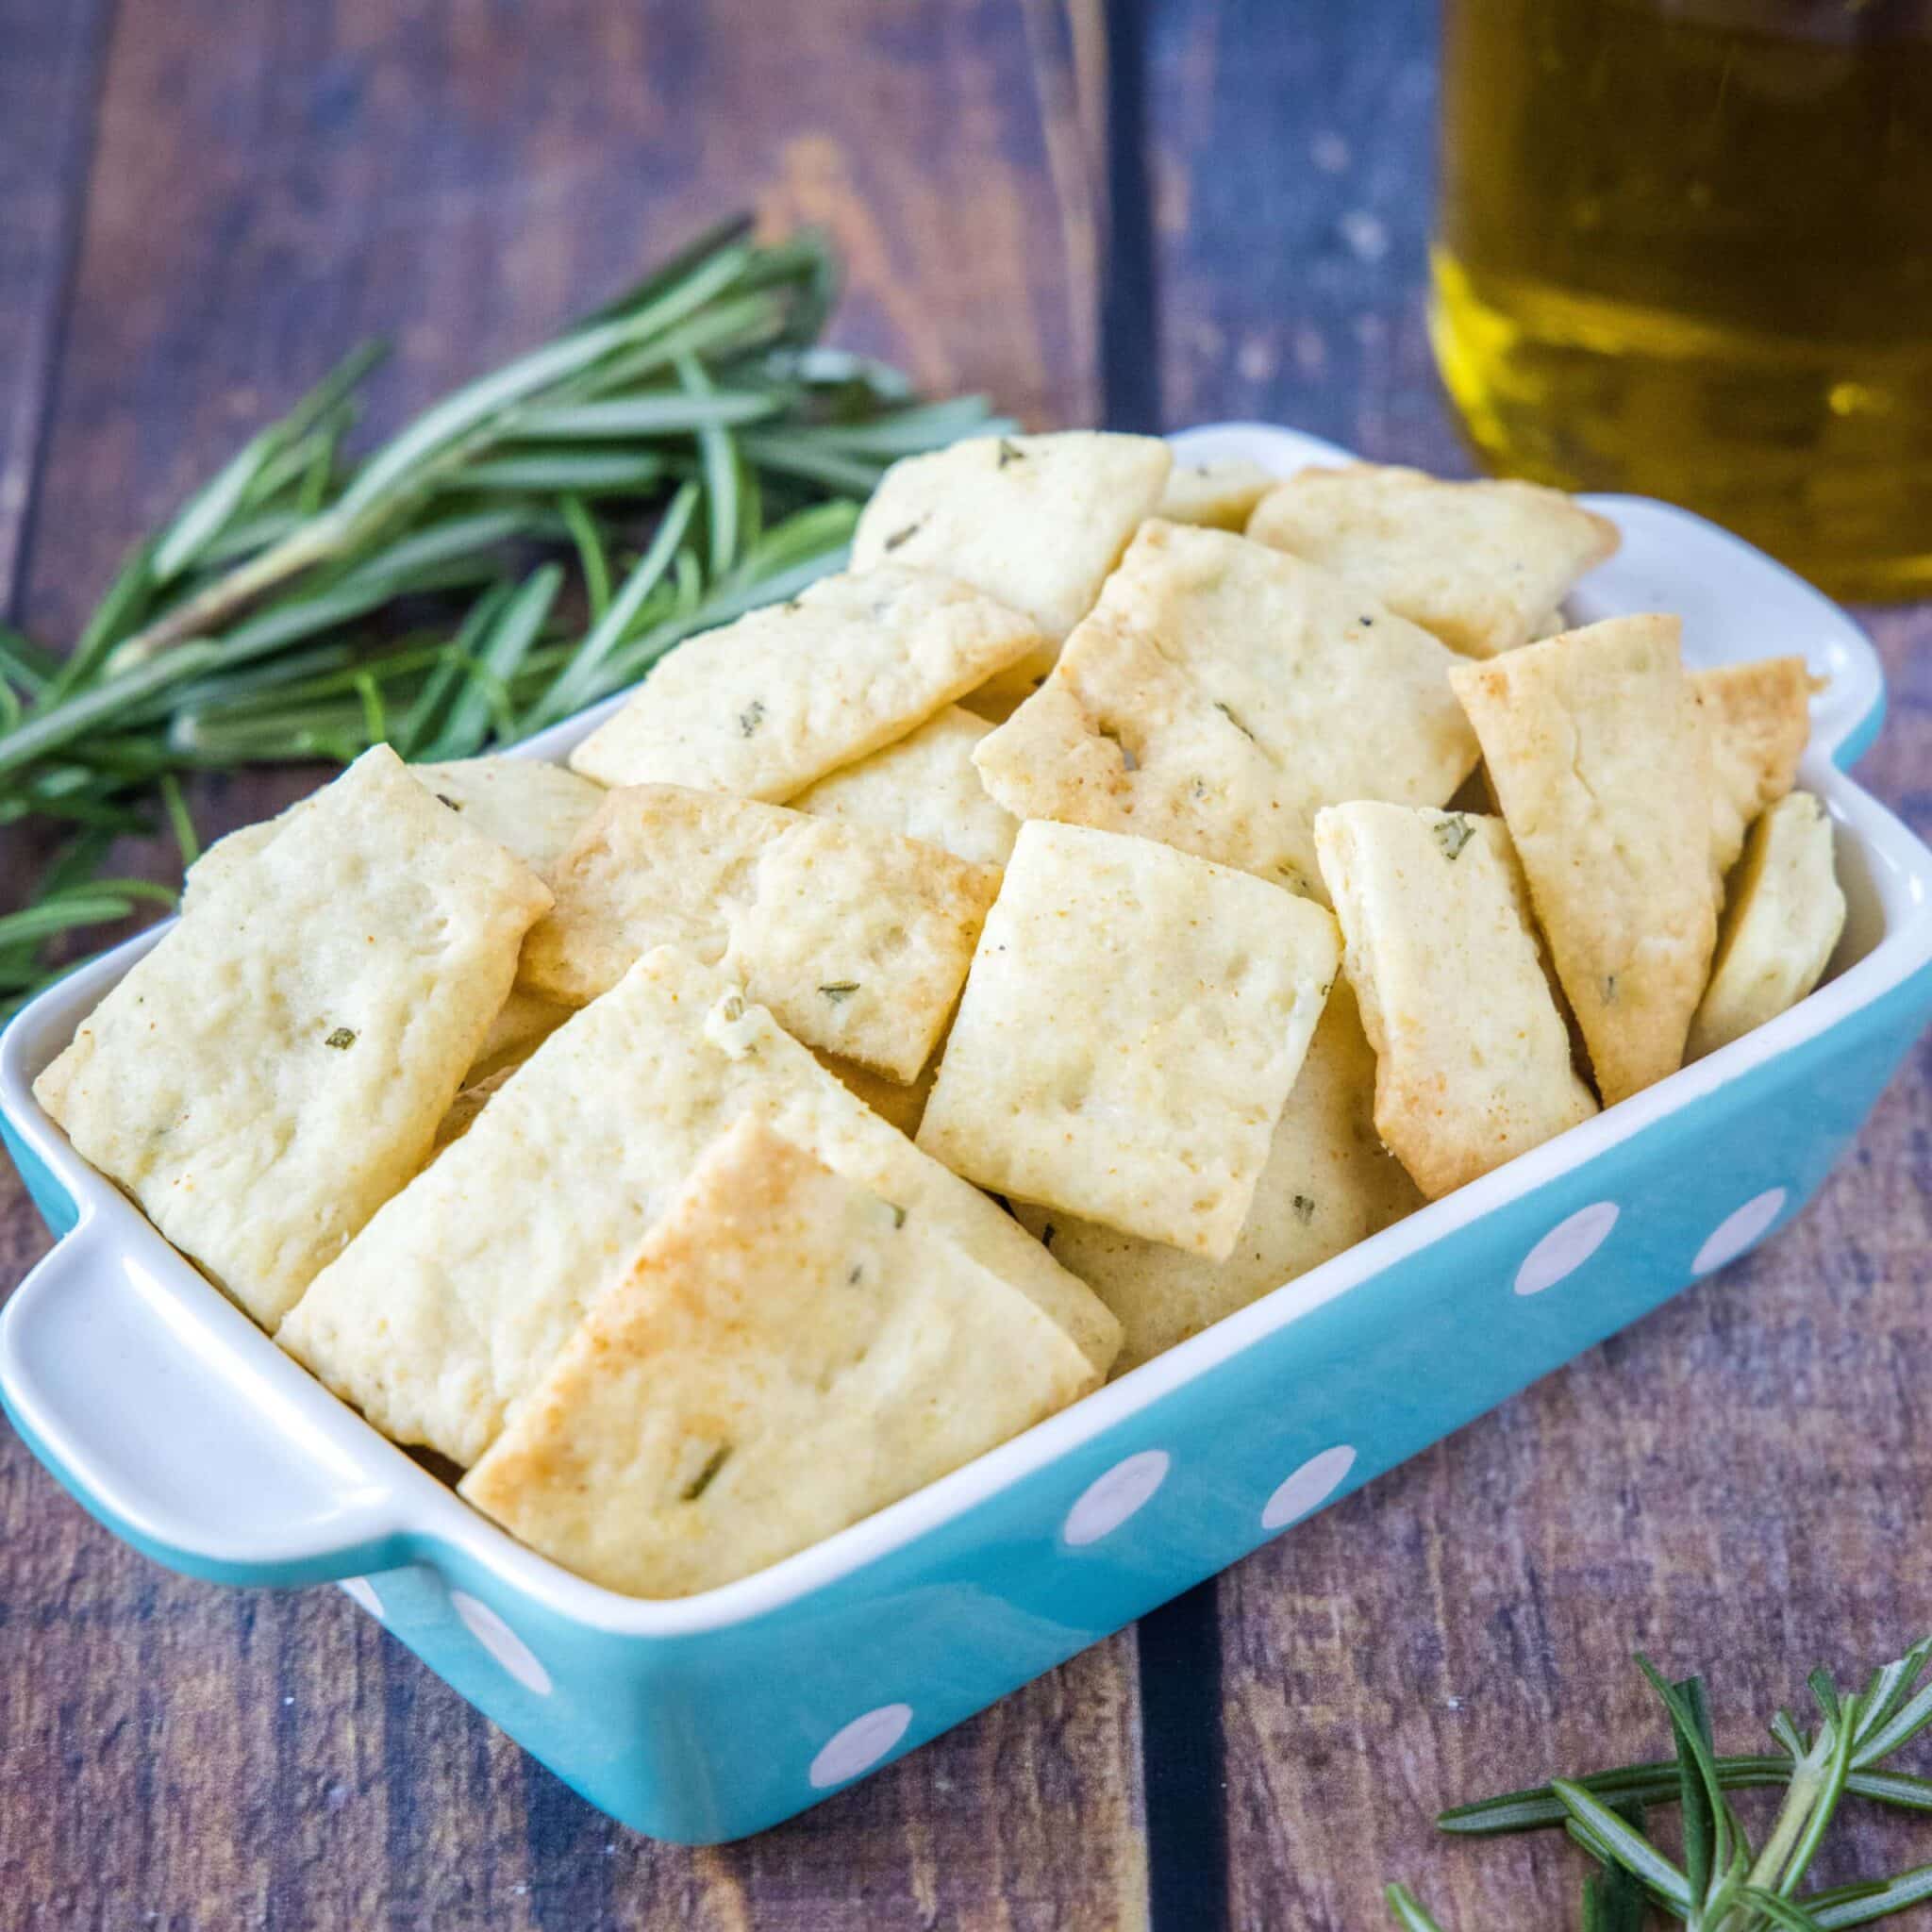 Rosemary crackers in a blue dish with sprigs of rosemary.